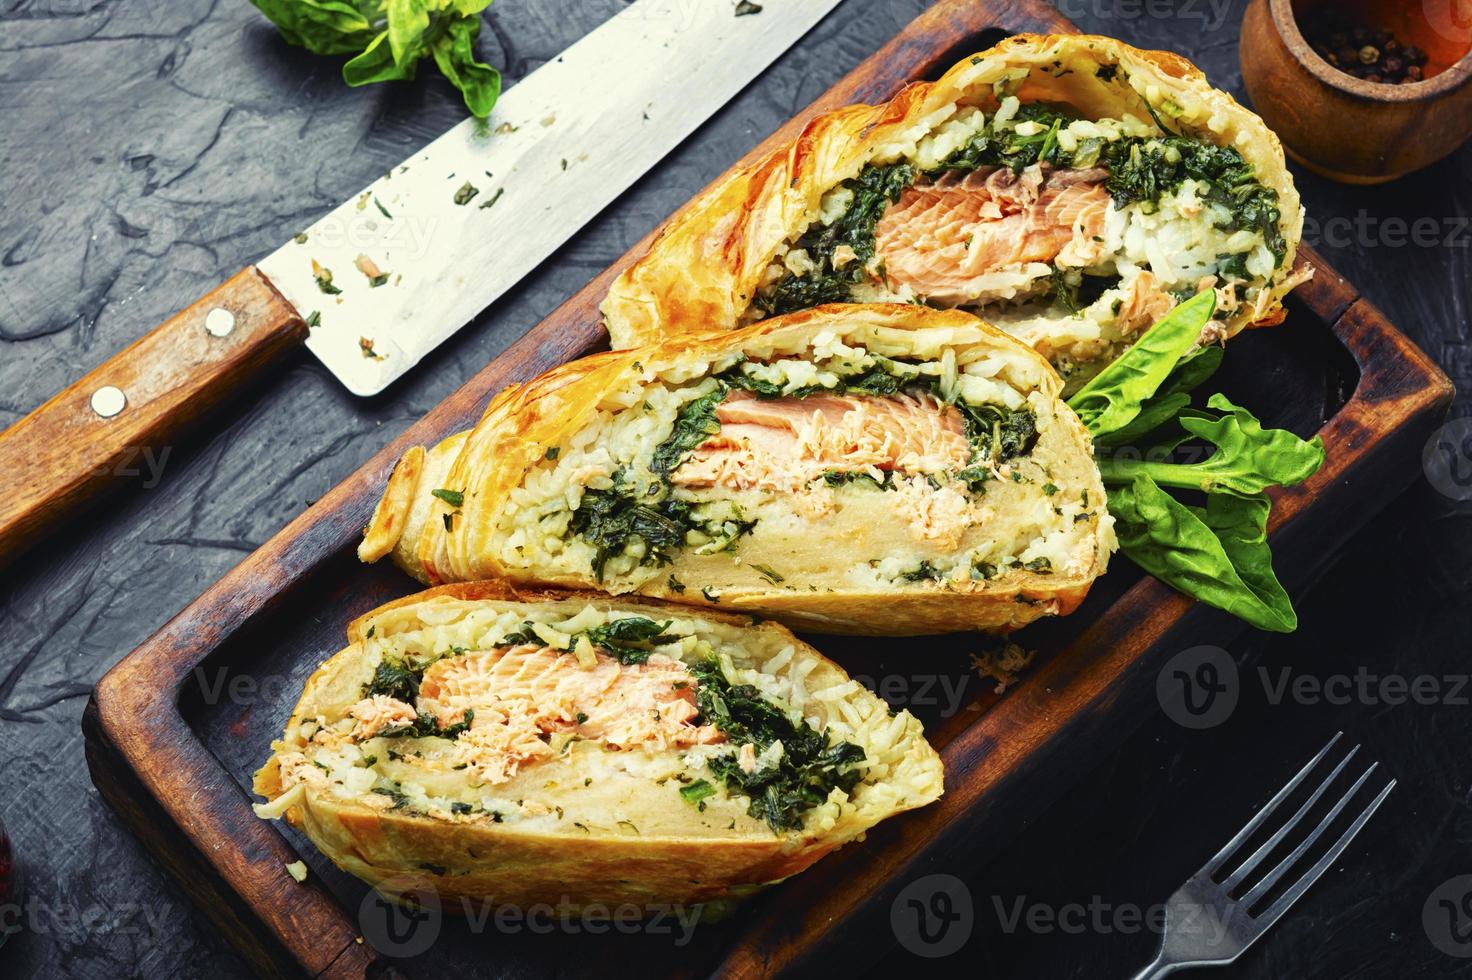 Salmon baked in dough. photo